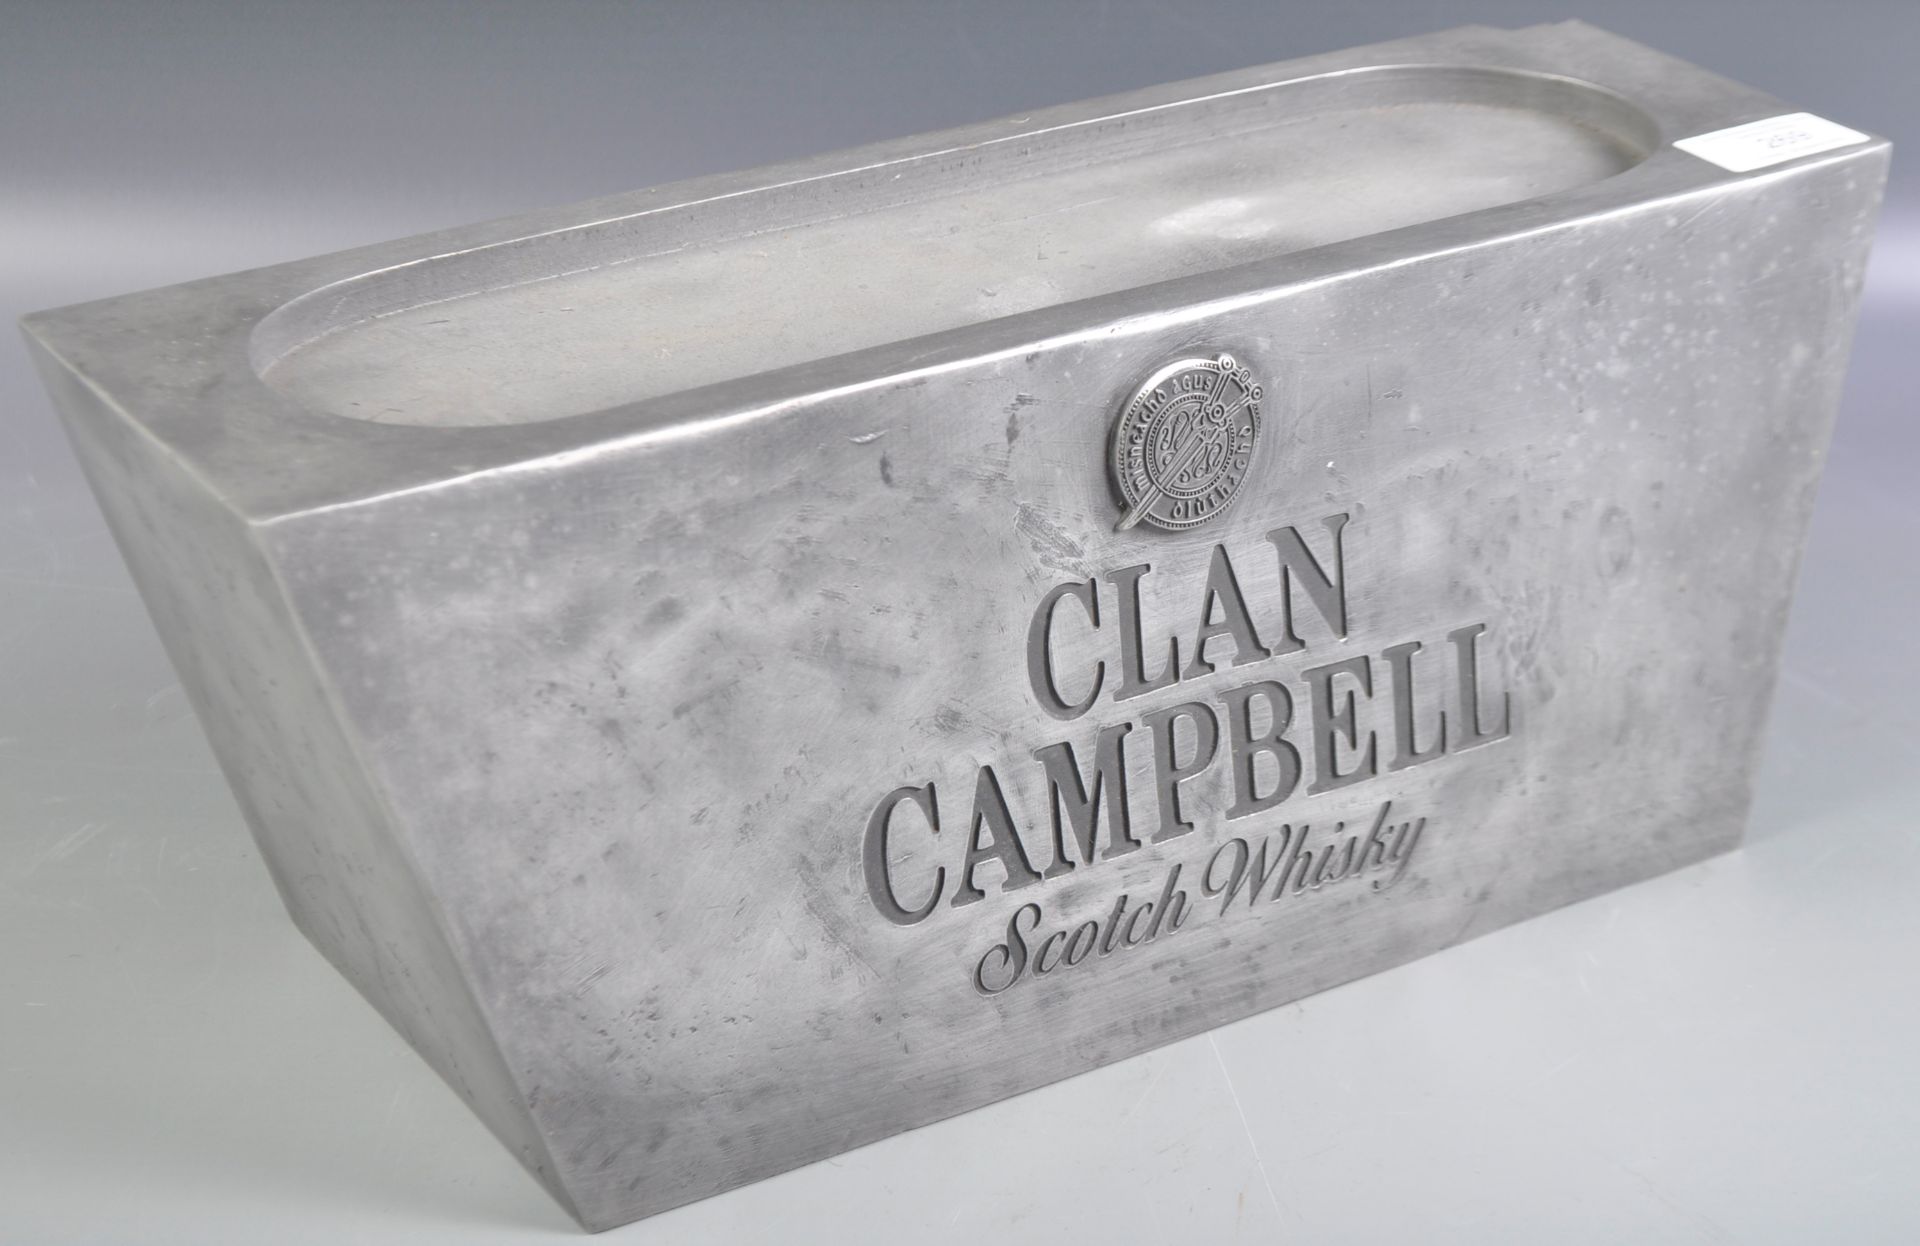 CLAN CAMPBELL CAST RESIN SHOP DISPLAY STAND PLINTH